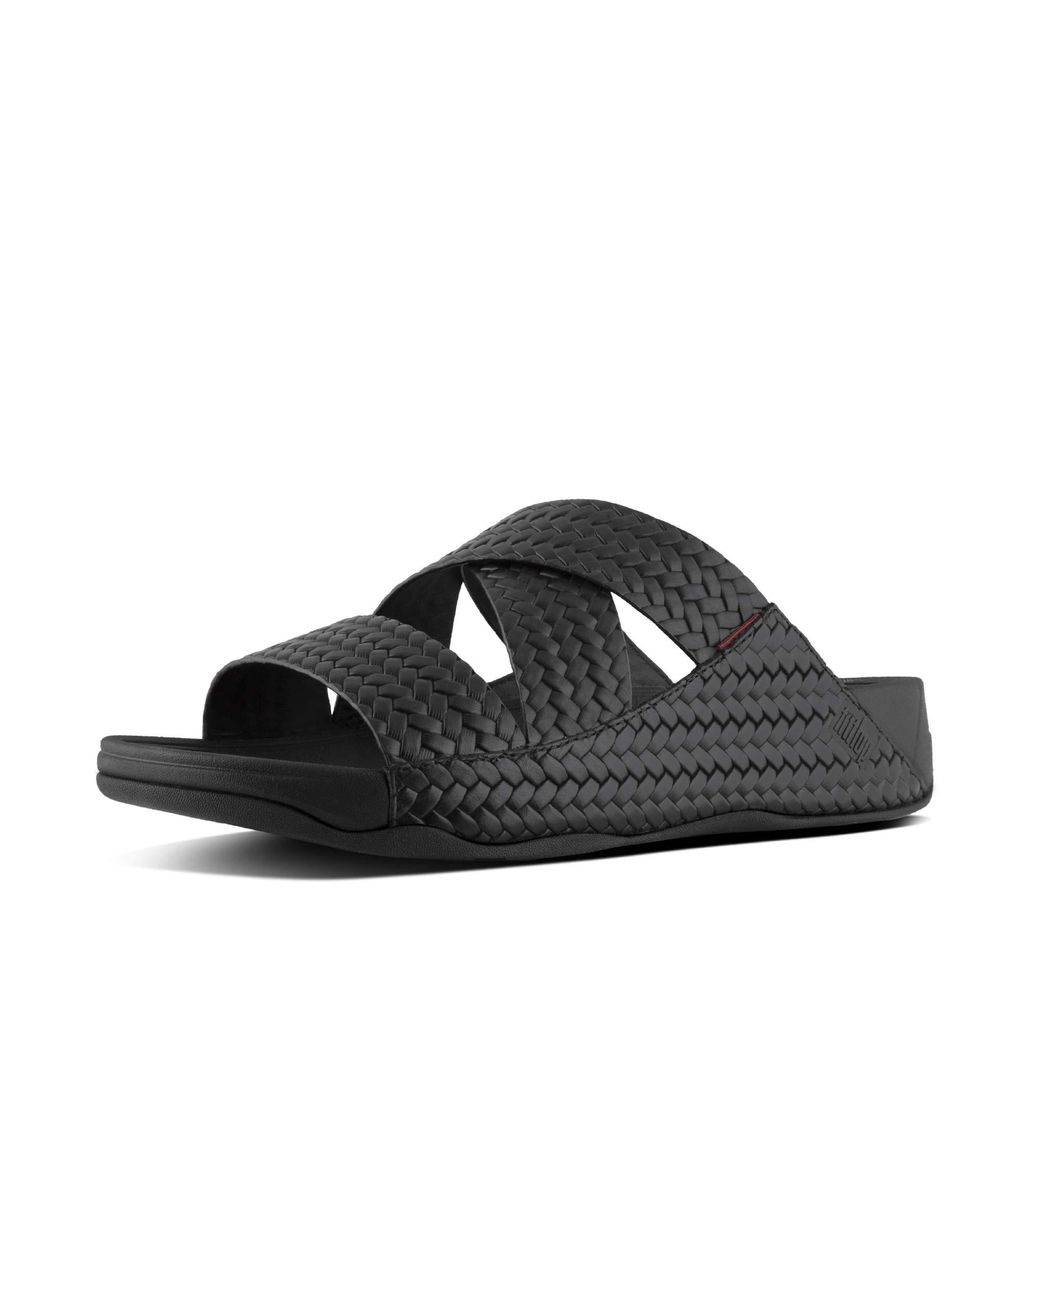 Fitflop S Chi Slide Woven Embossed Leather Sandal Shoes Black for Men ...